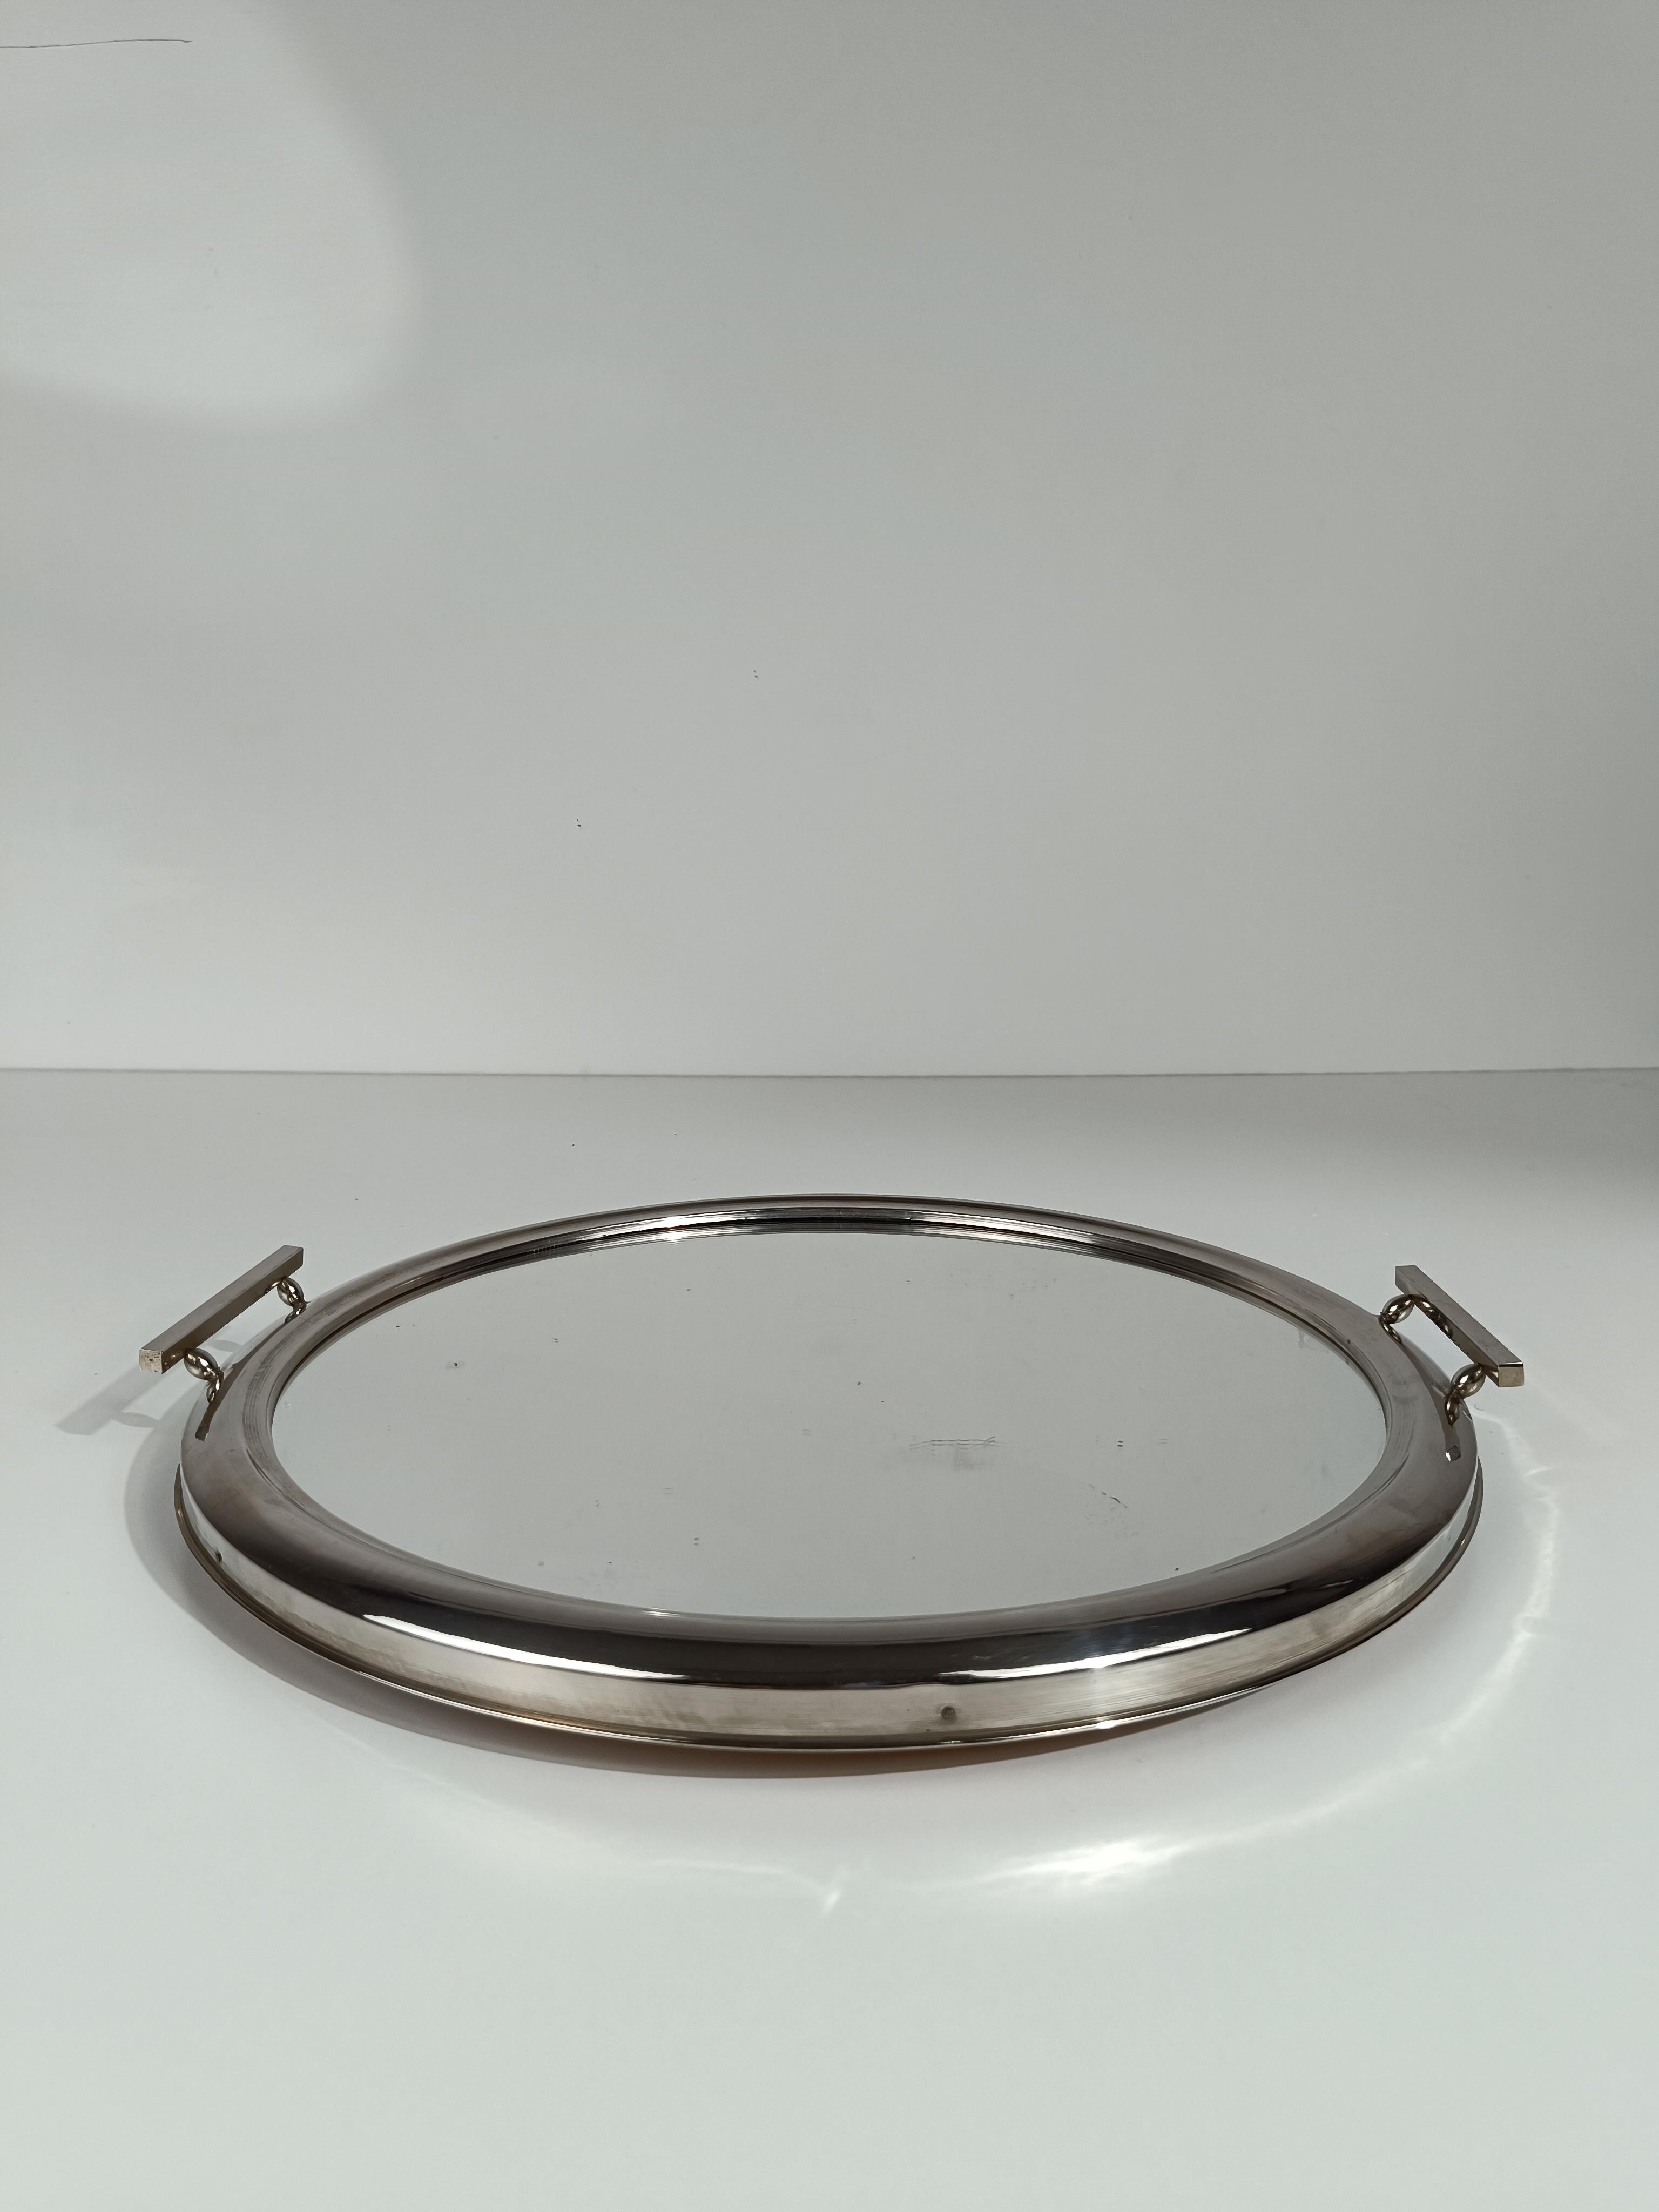 Art Deco Mirrored Round Tray in Chromed Metal, Italy 1930 For Sale 2